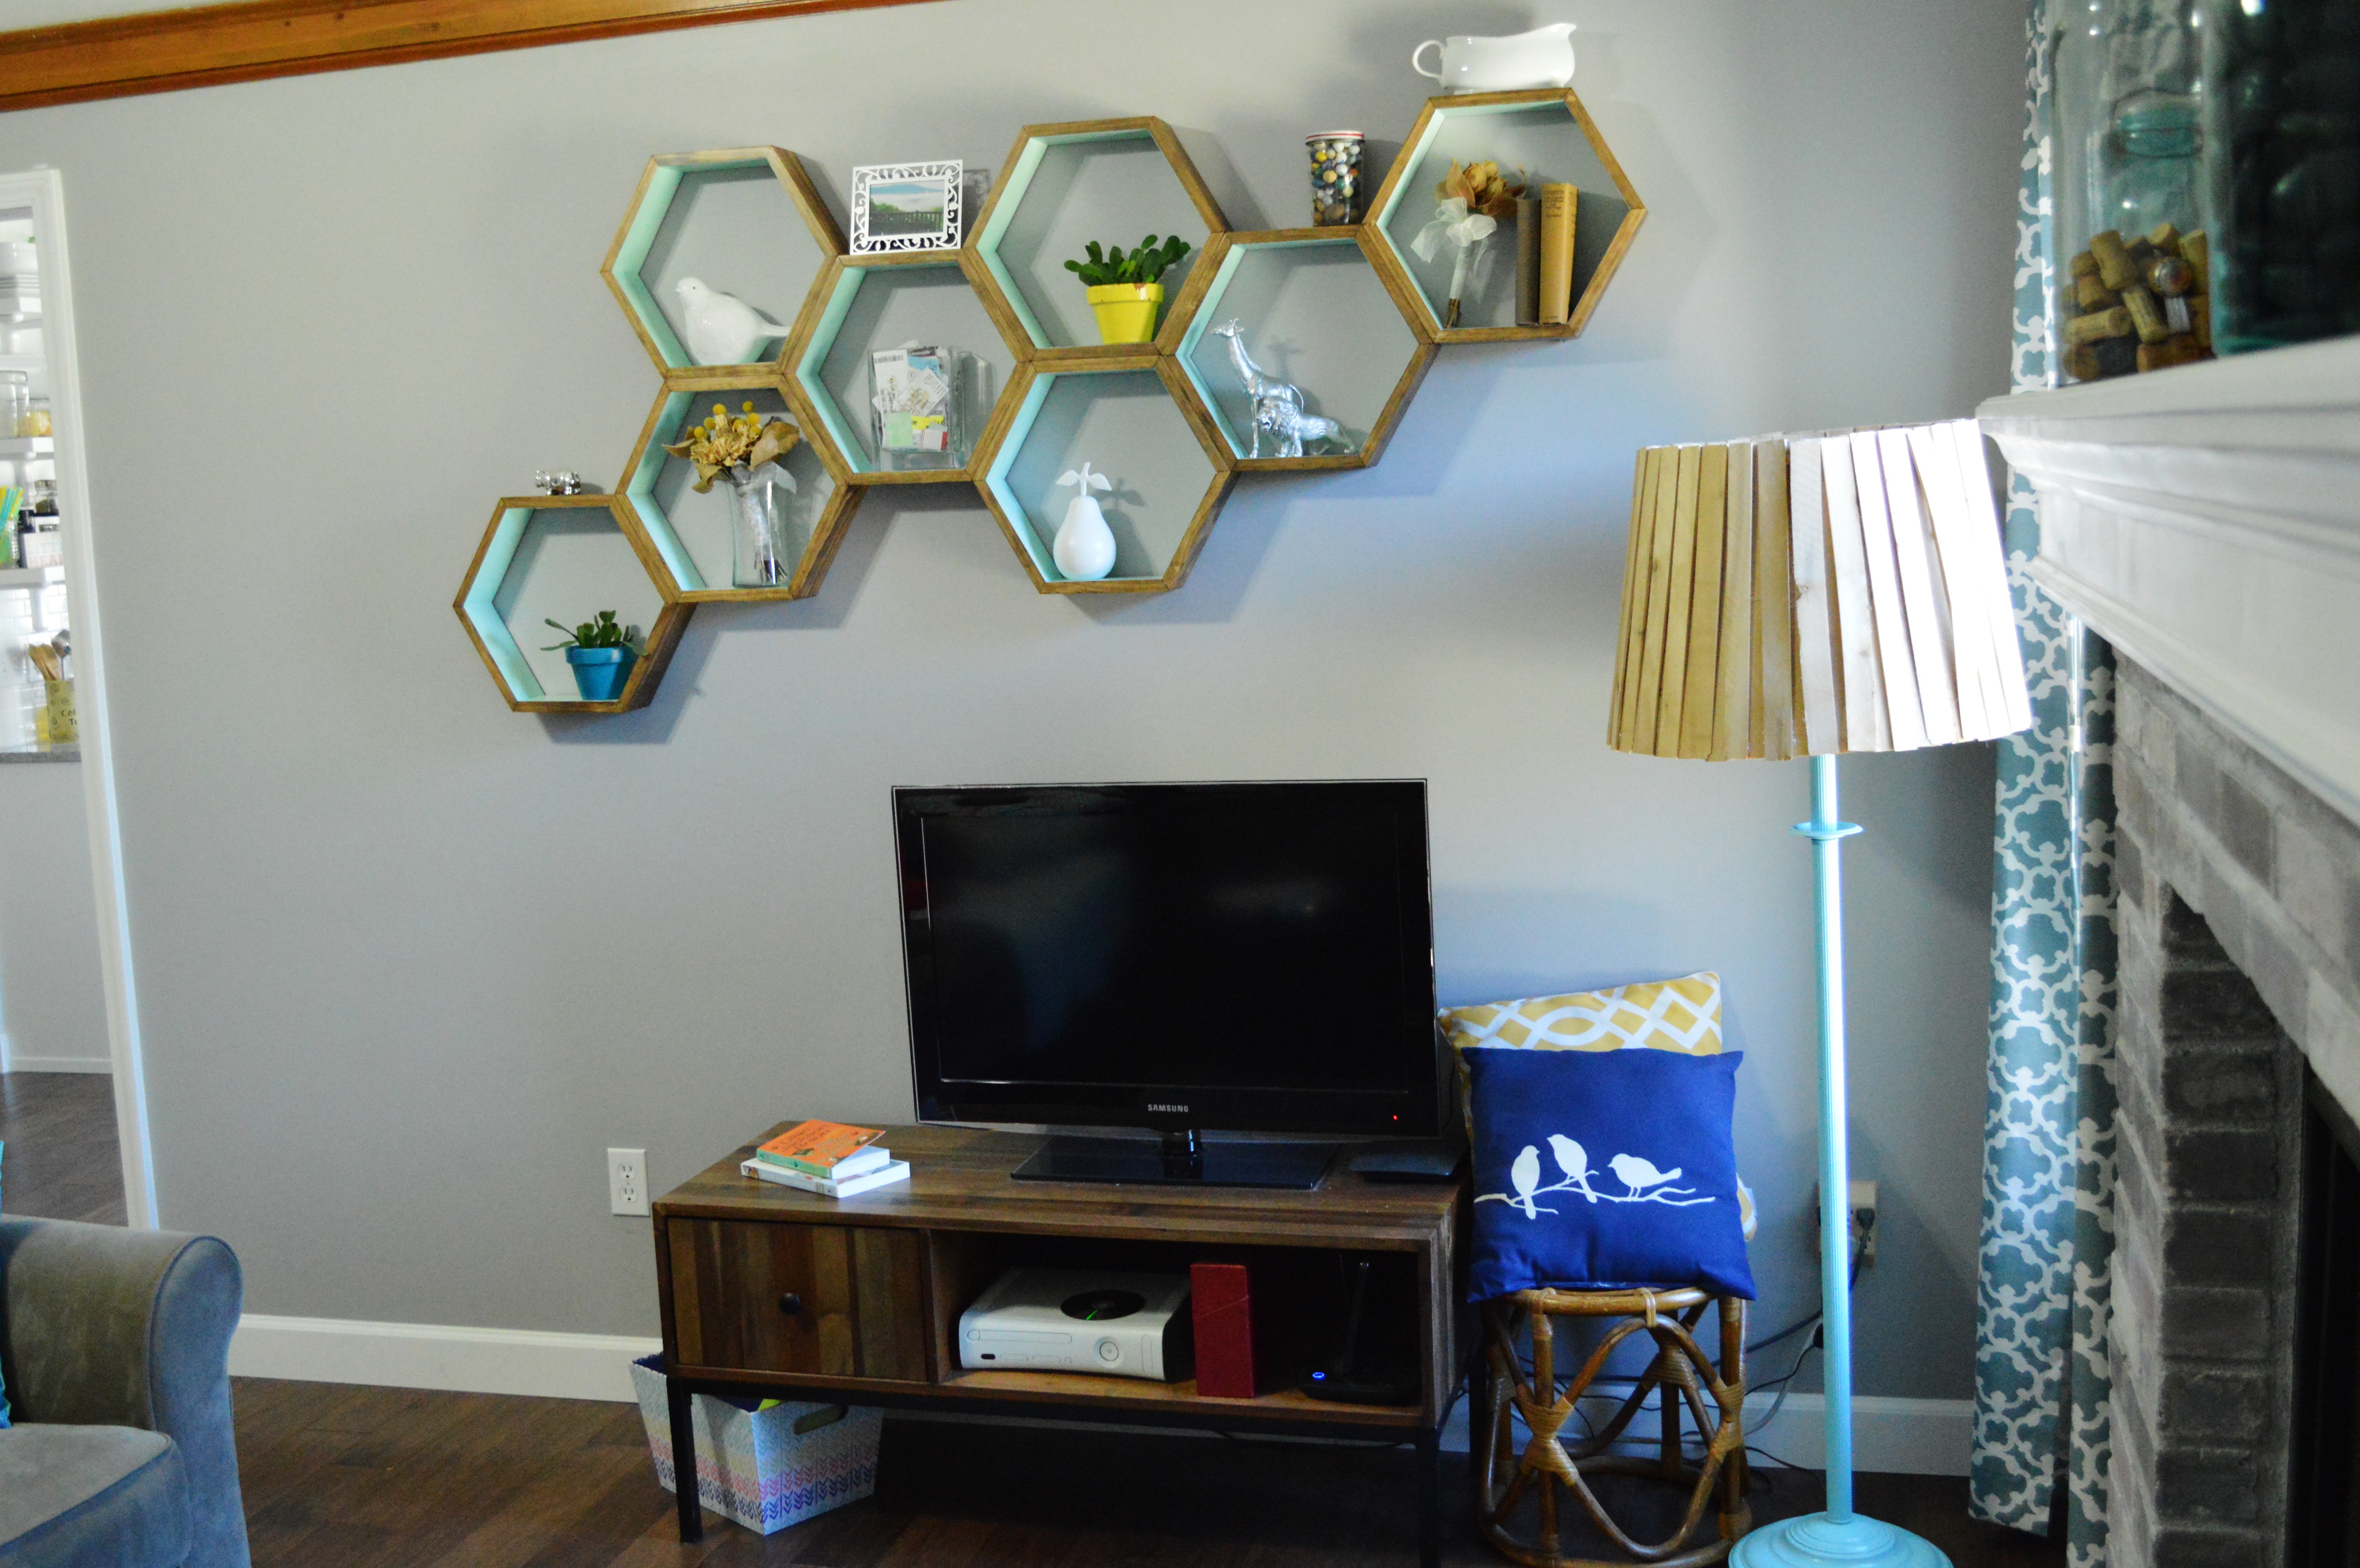 How To Decorate Honeycomb Shelves - Katie's Bliss